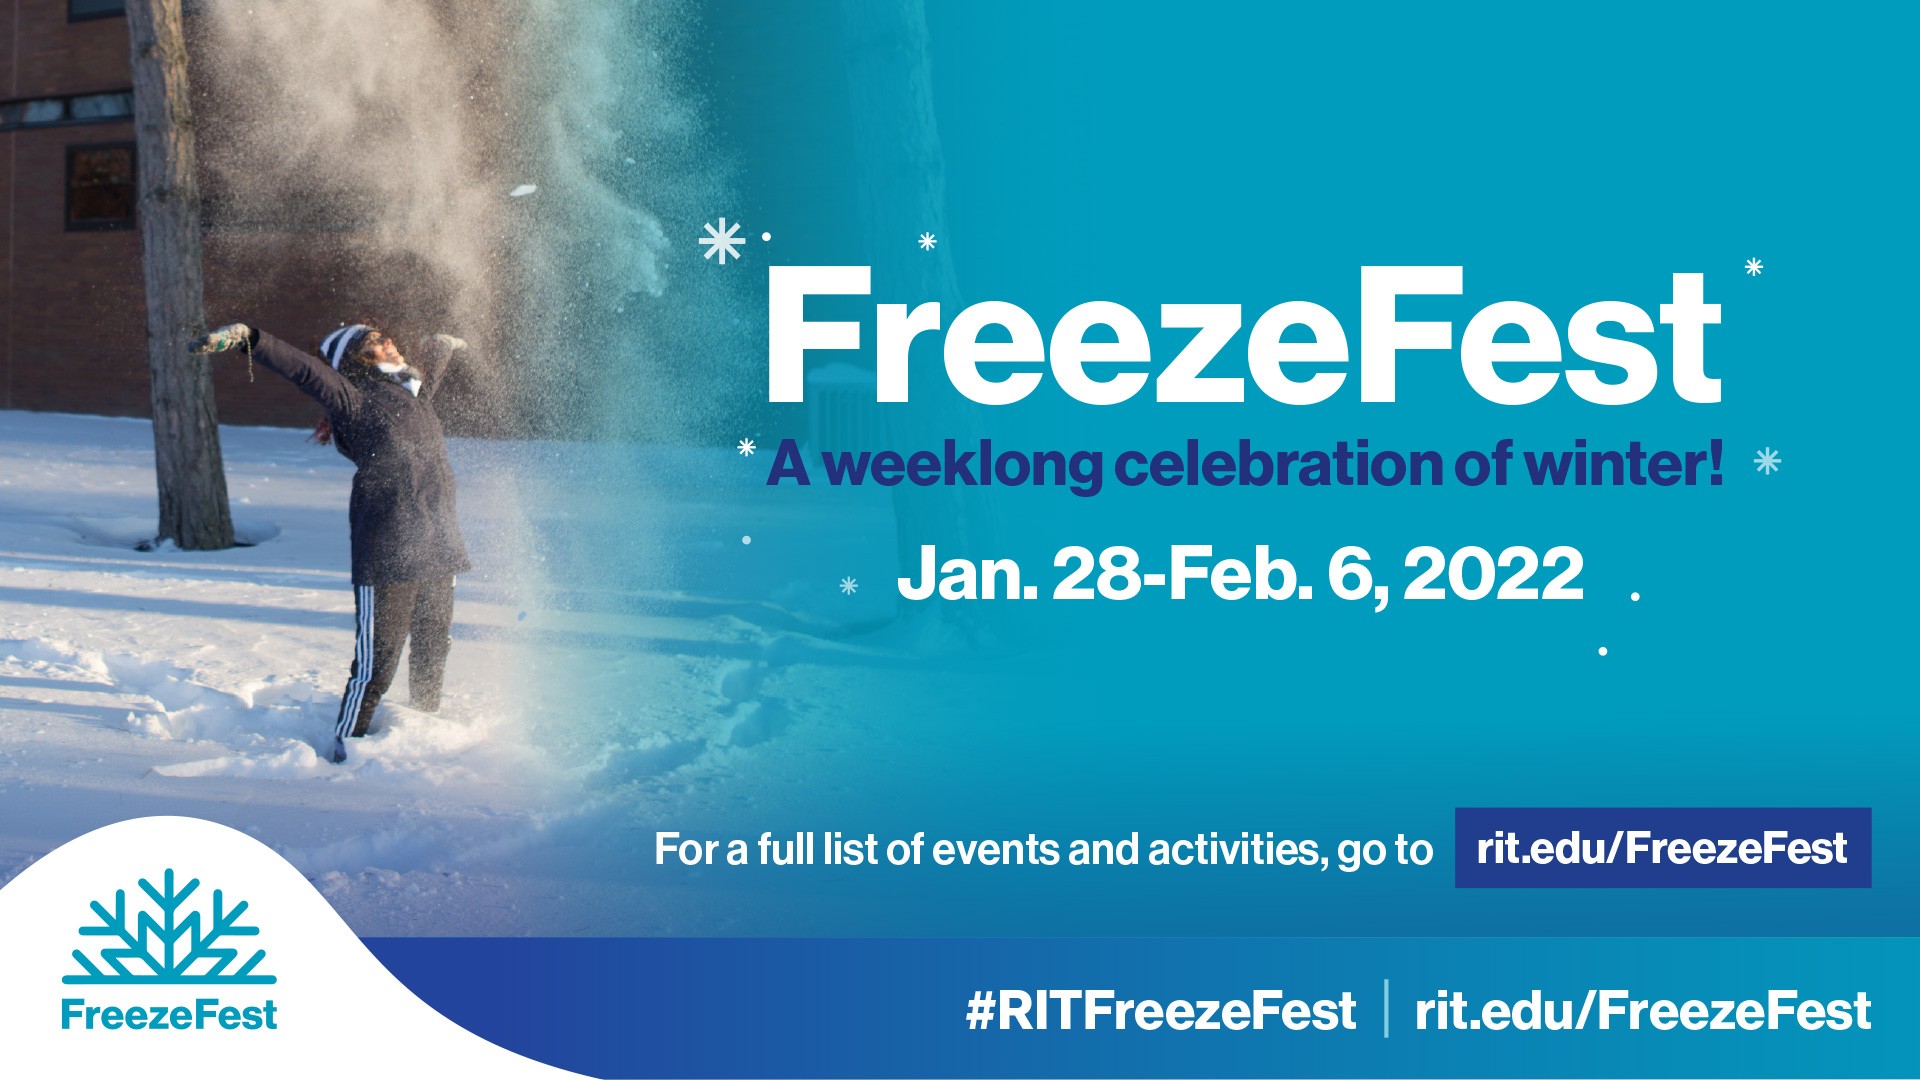 image of a student playing in the snow with the FreezeFest dates of January 28-February 6, 2022 and website, rit.edu/freezefest